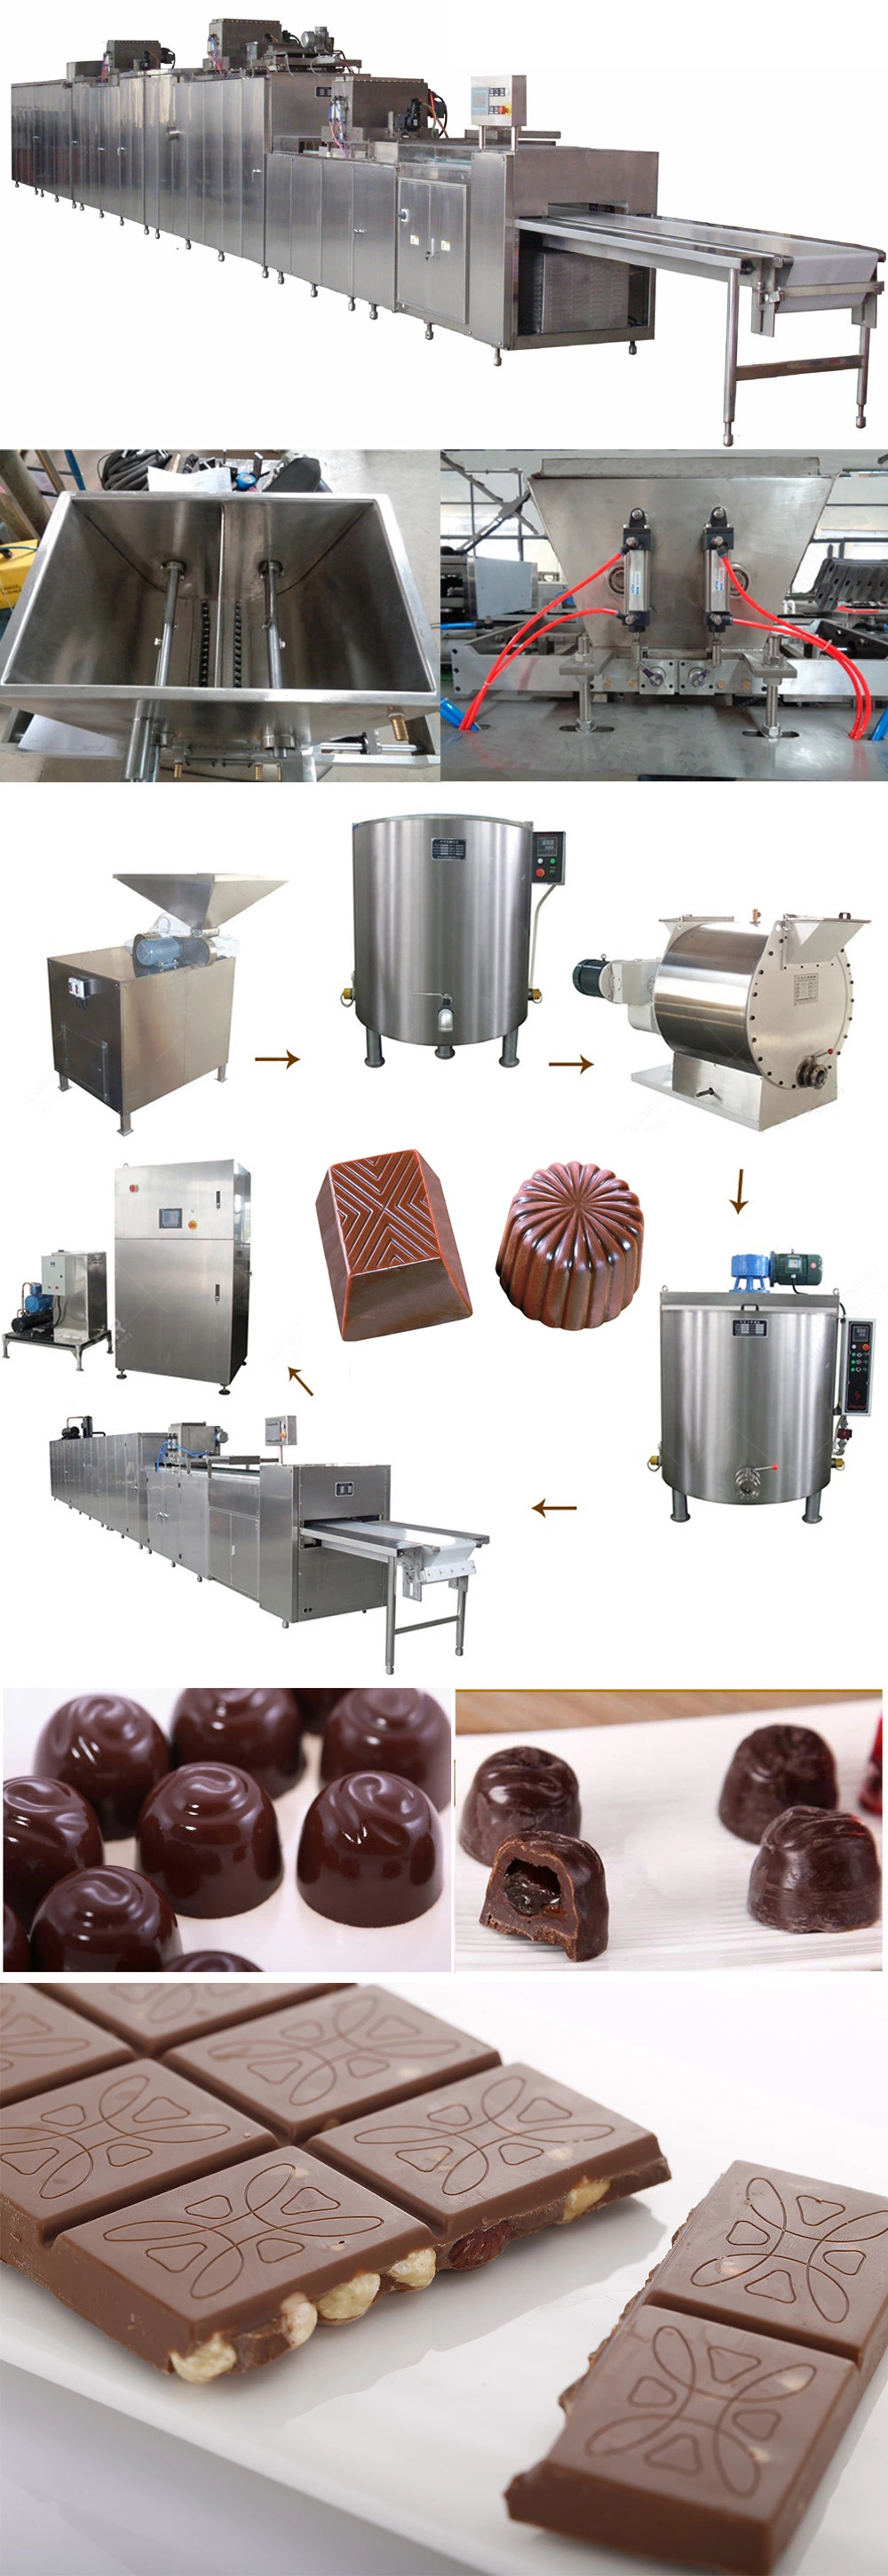 Full Automatic Chocolate Moulding Line for Making Chocolate Bars, Chocolate Tablets